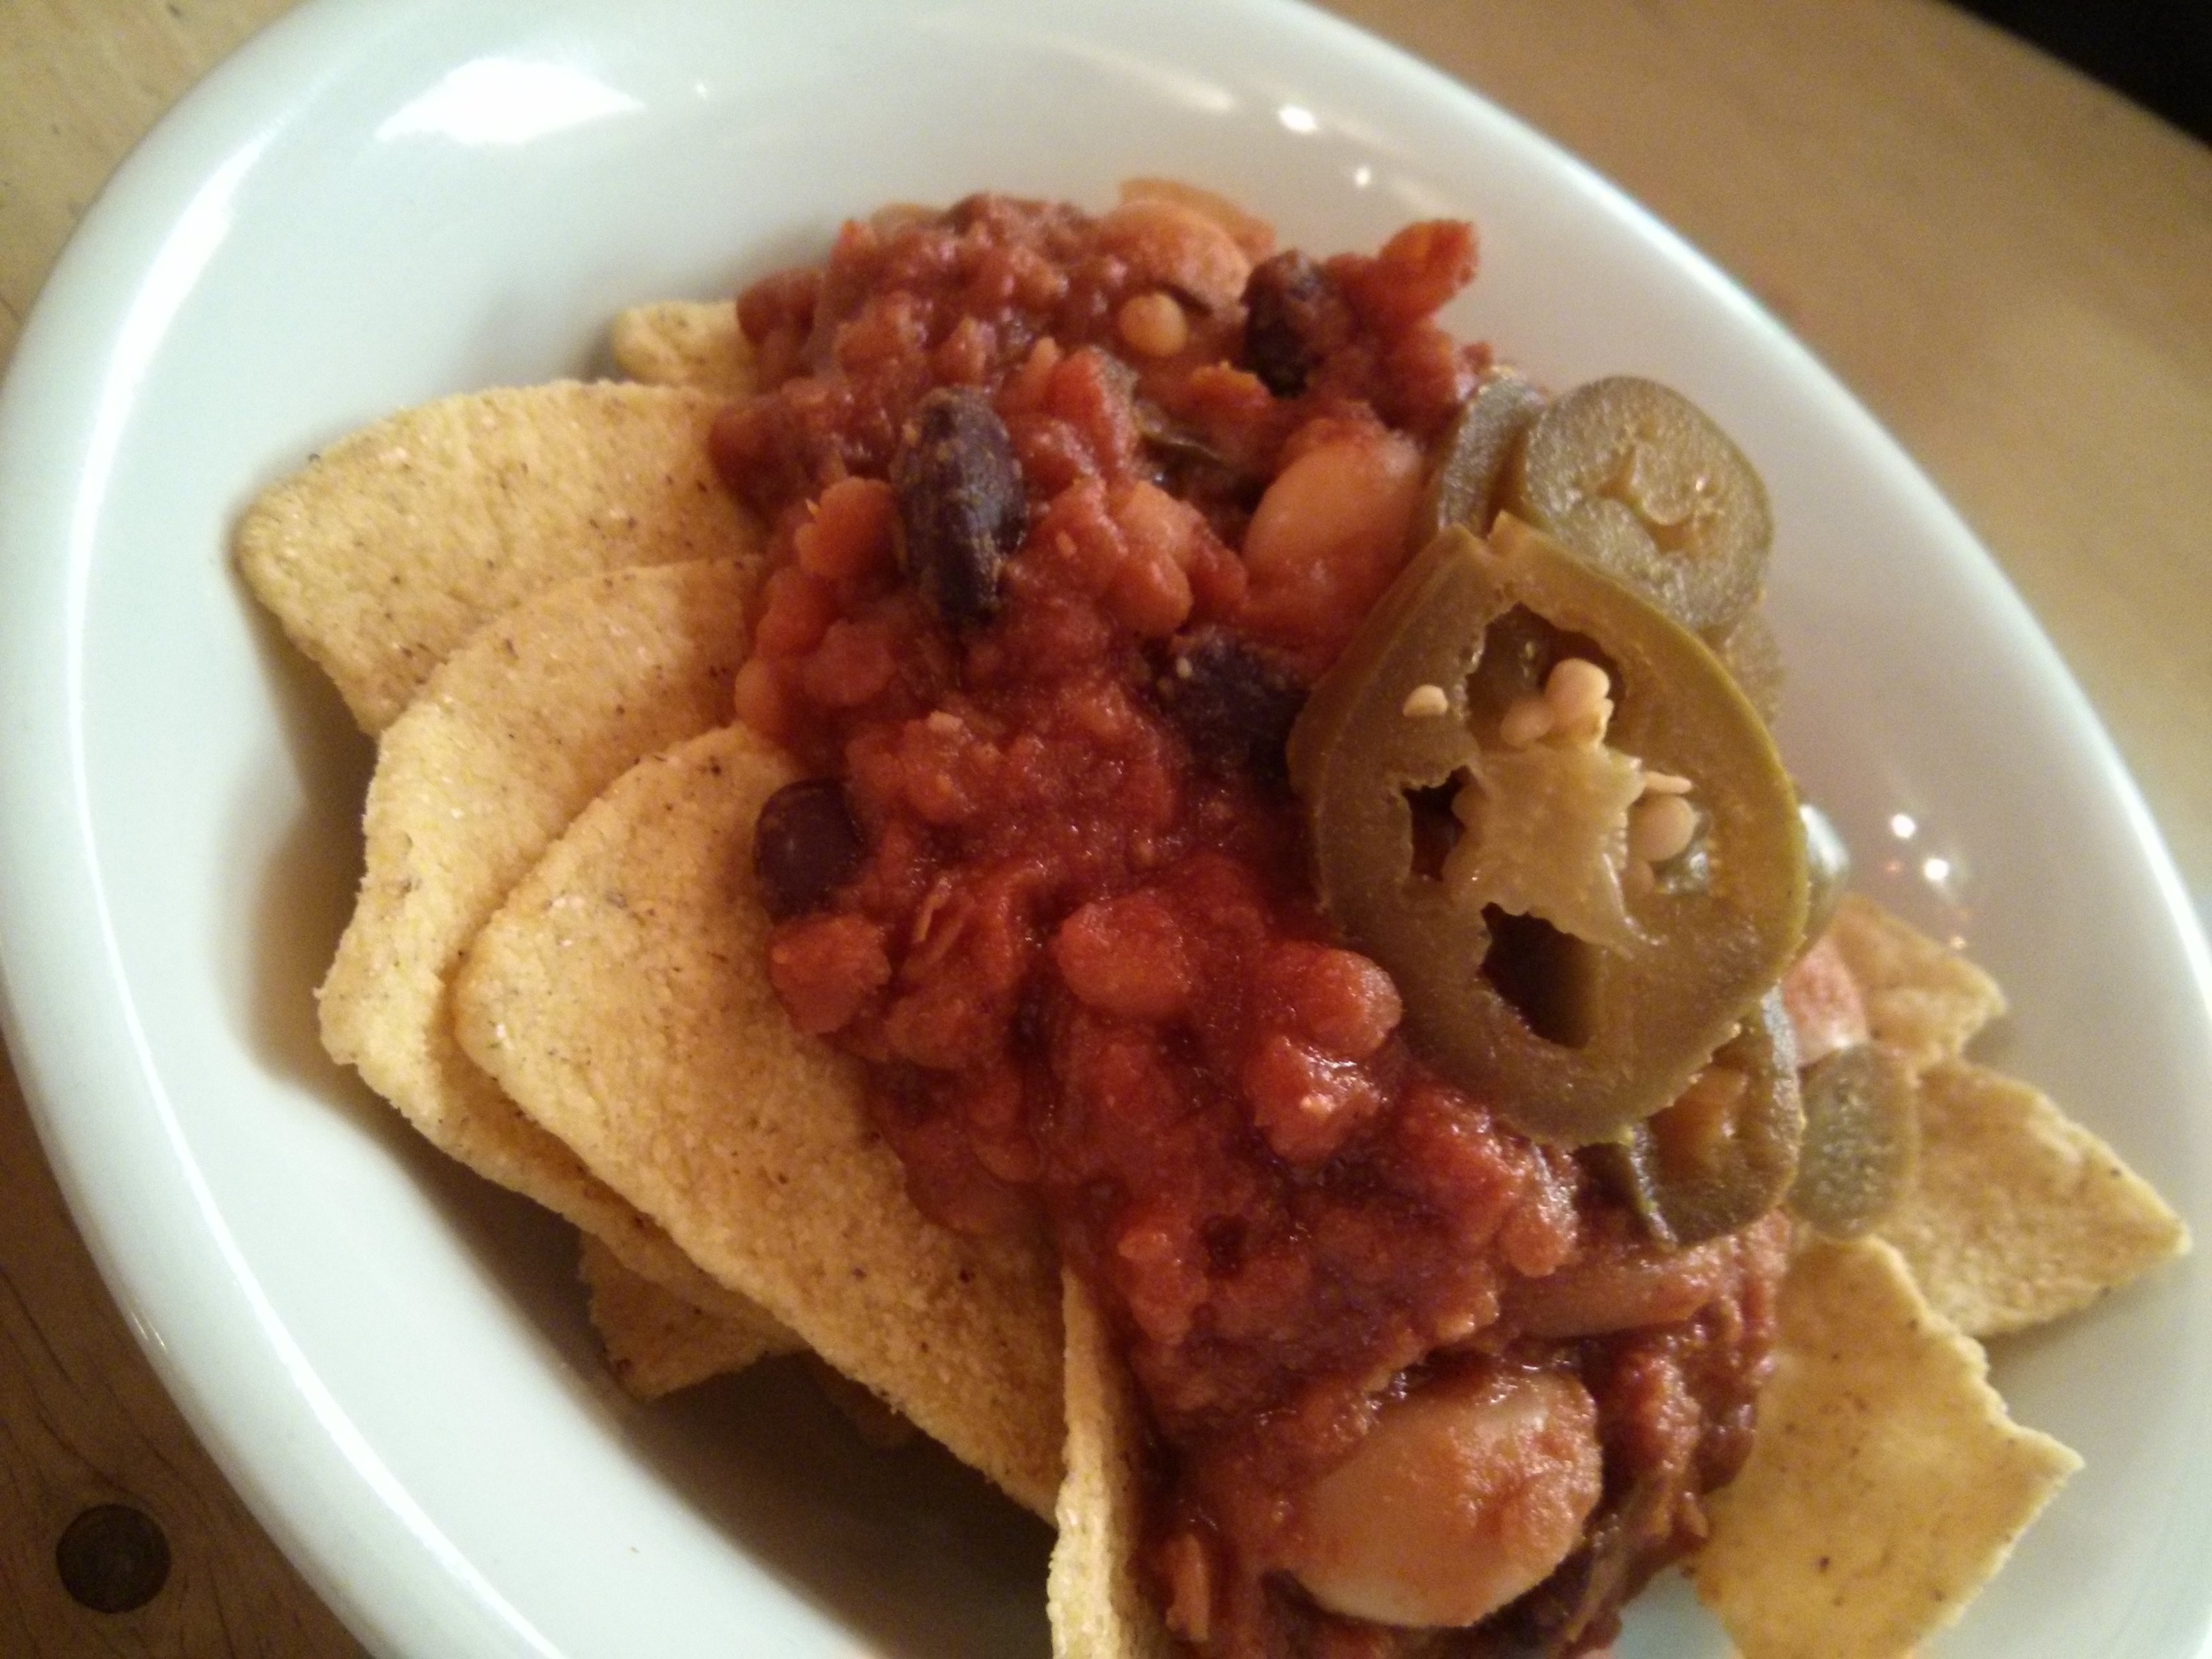 Kid size portion of nachos with meatless chilli